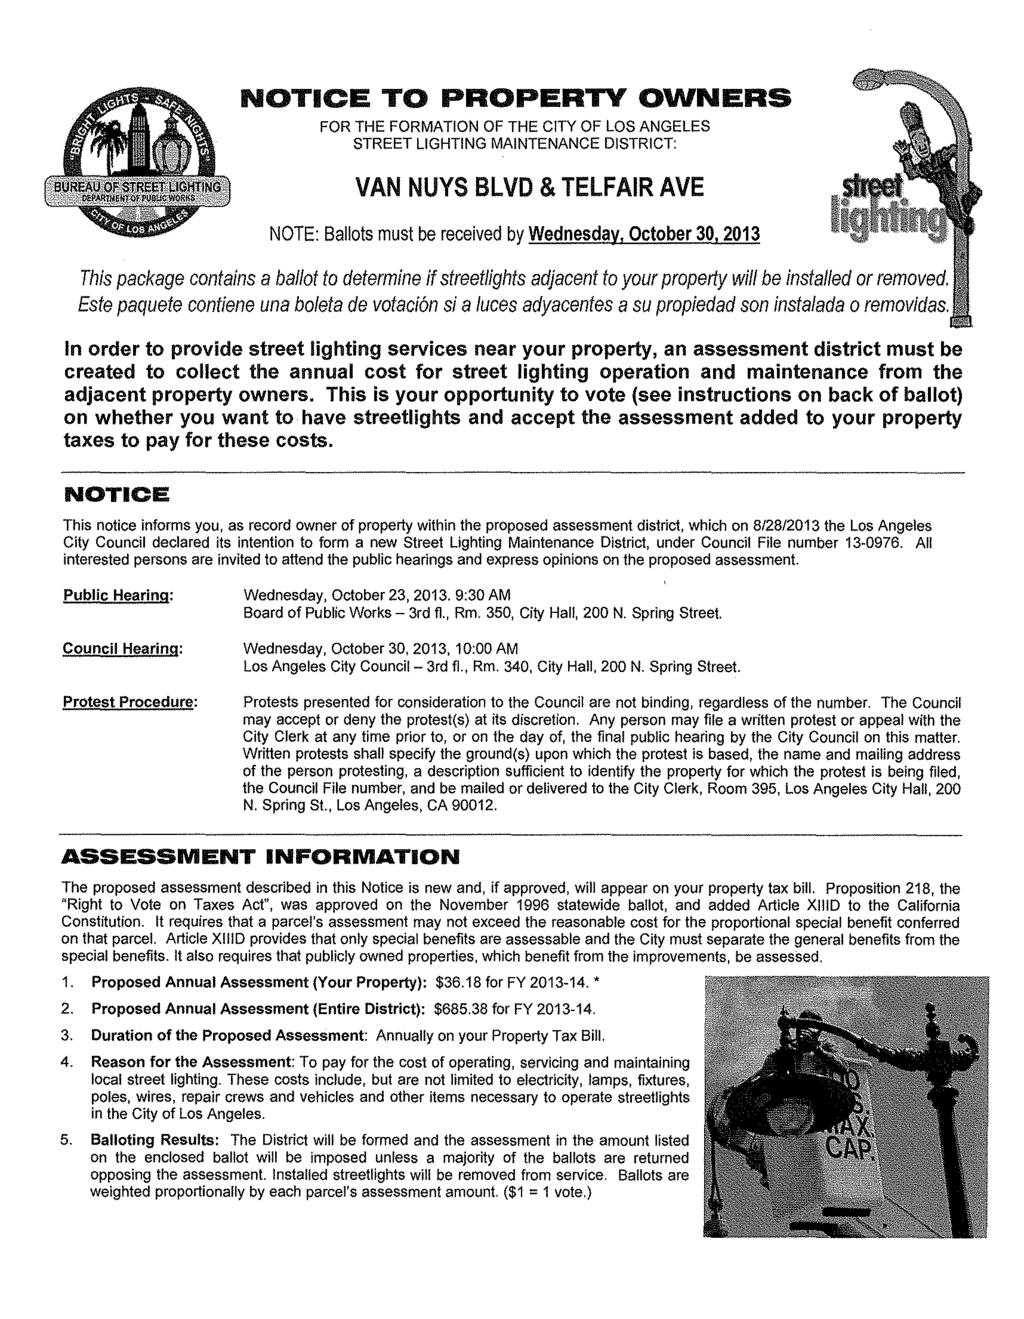 NOTICE TO PROPERTY OWNERS FOR THE FORMATION OF THE CITY OF LOS ANGELES STREET LIGHTING MAINTENANCE DISTRICT: VAN NUYS BLVD & TELFAIR AVE NOTE: Ballots must be received by Wednesday, October 30,2013